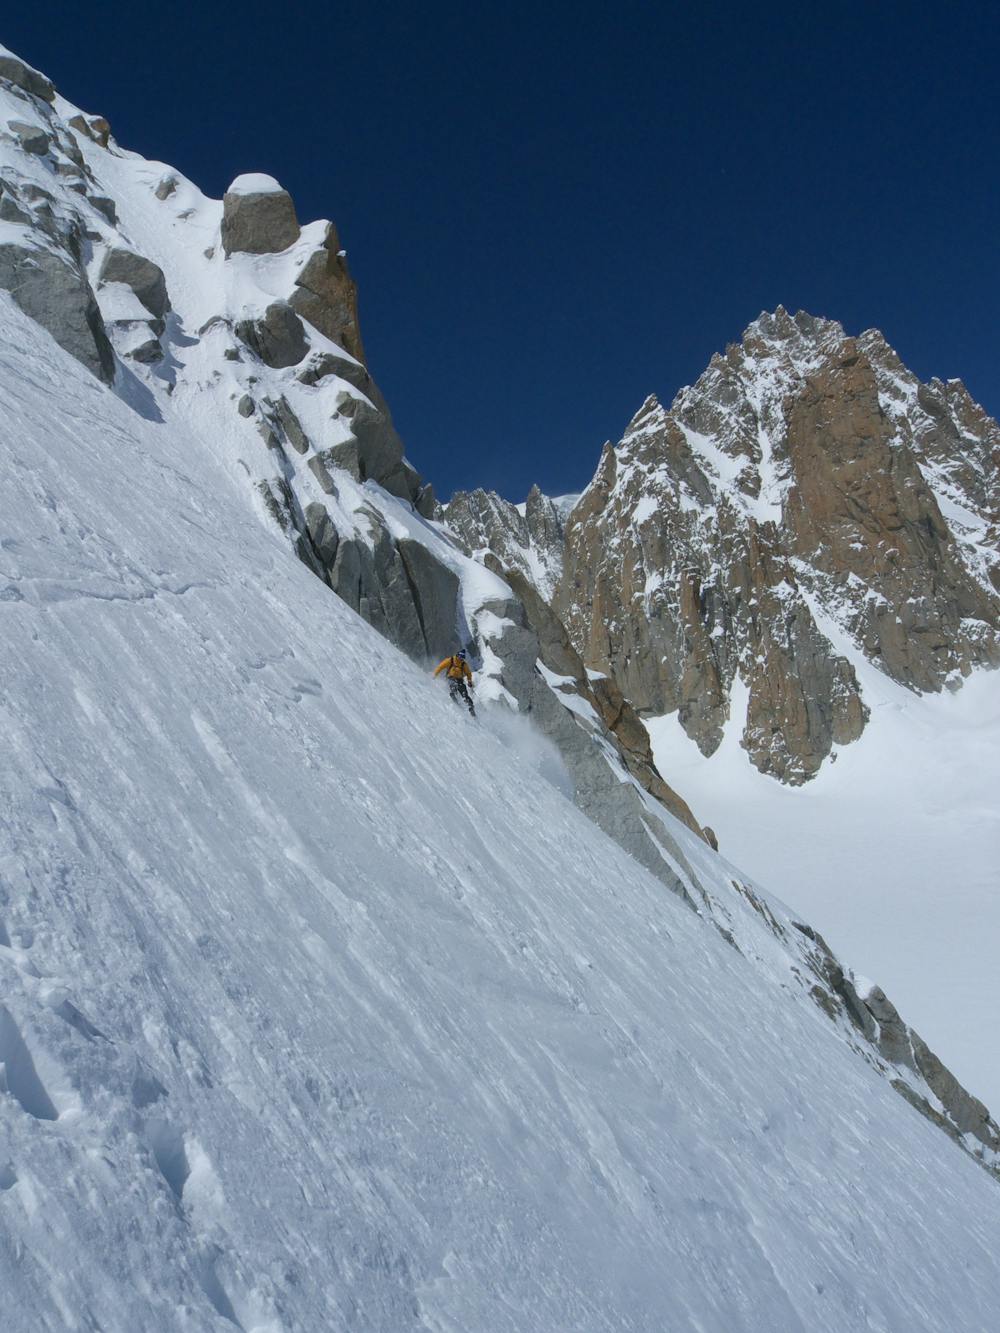 Cirque Maudit provides a stunning backdrop to the upper face.